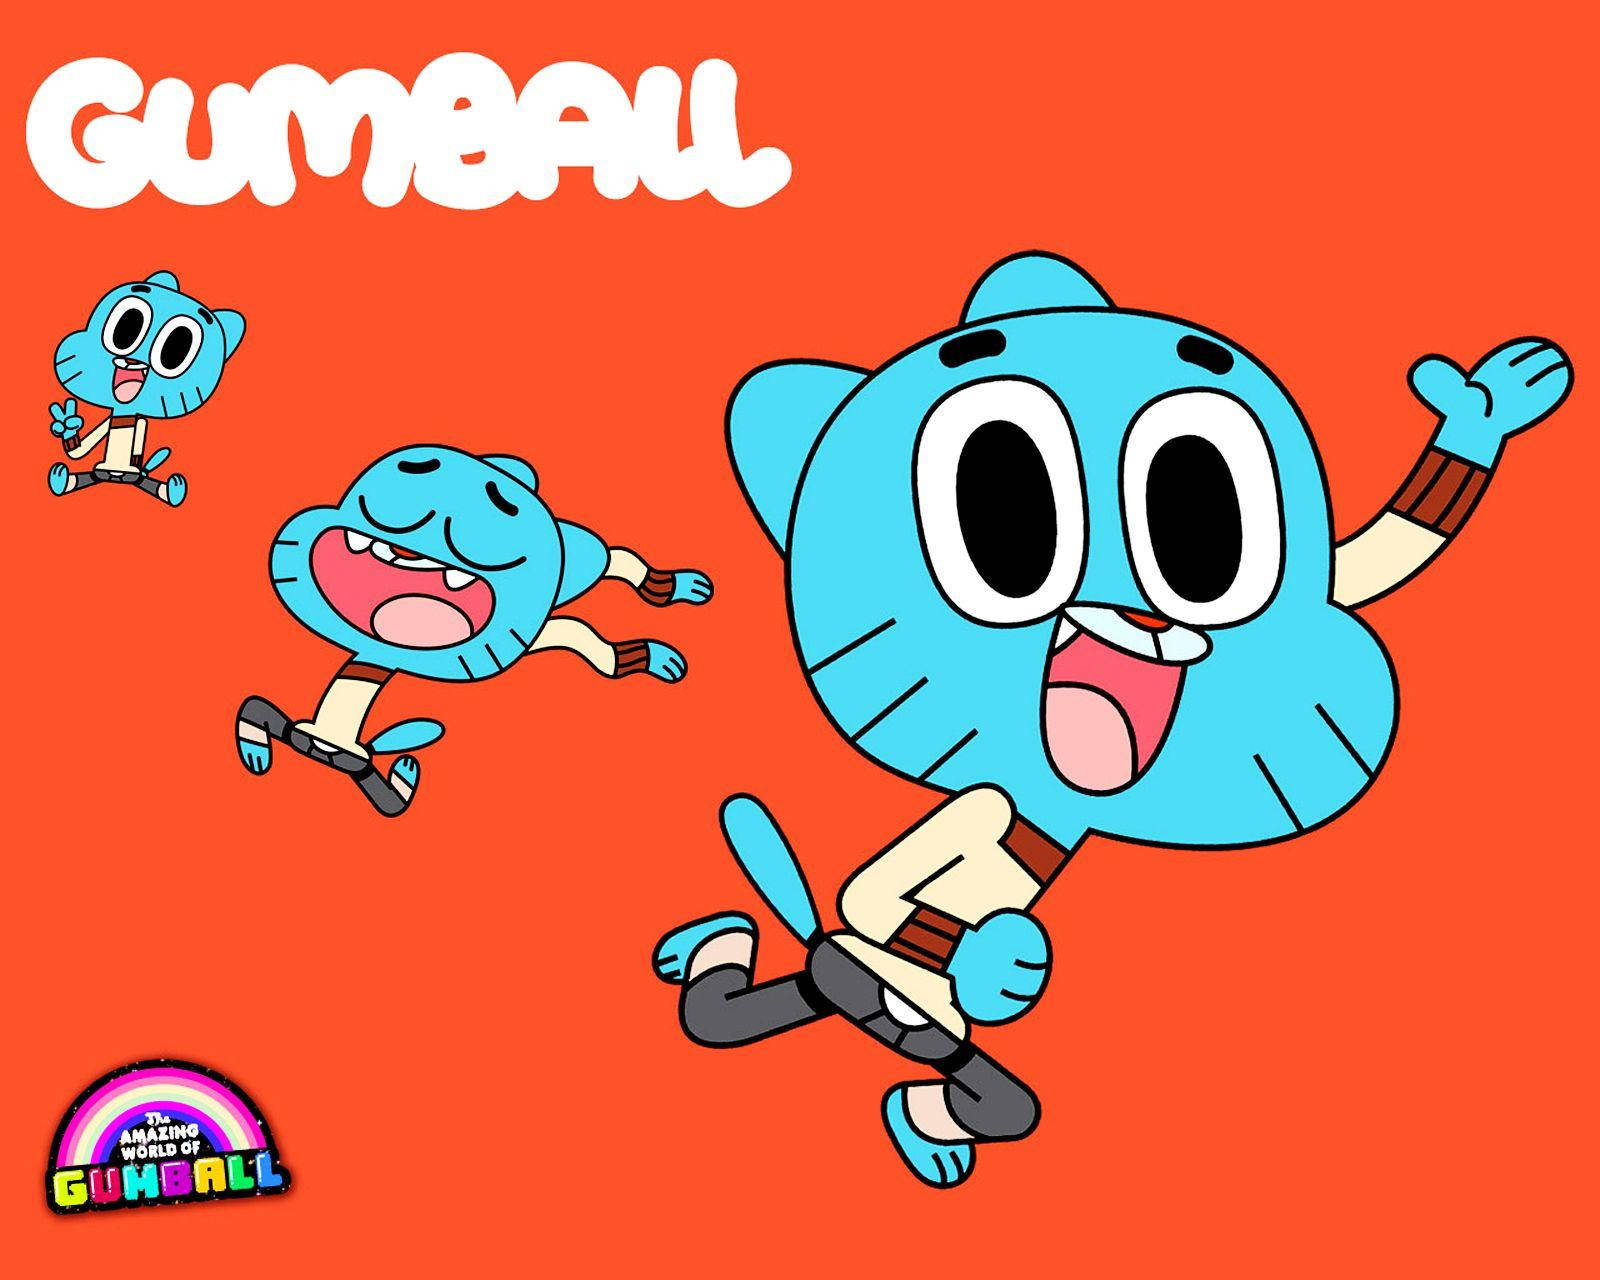 Three Gumball Positions